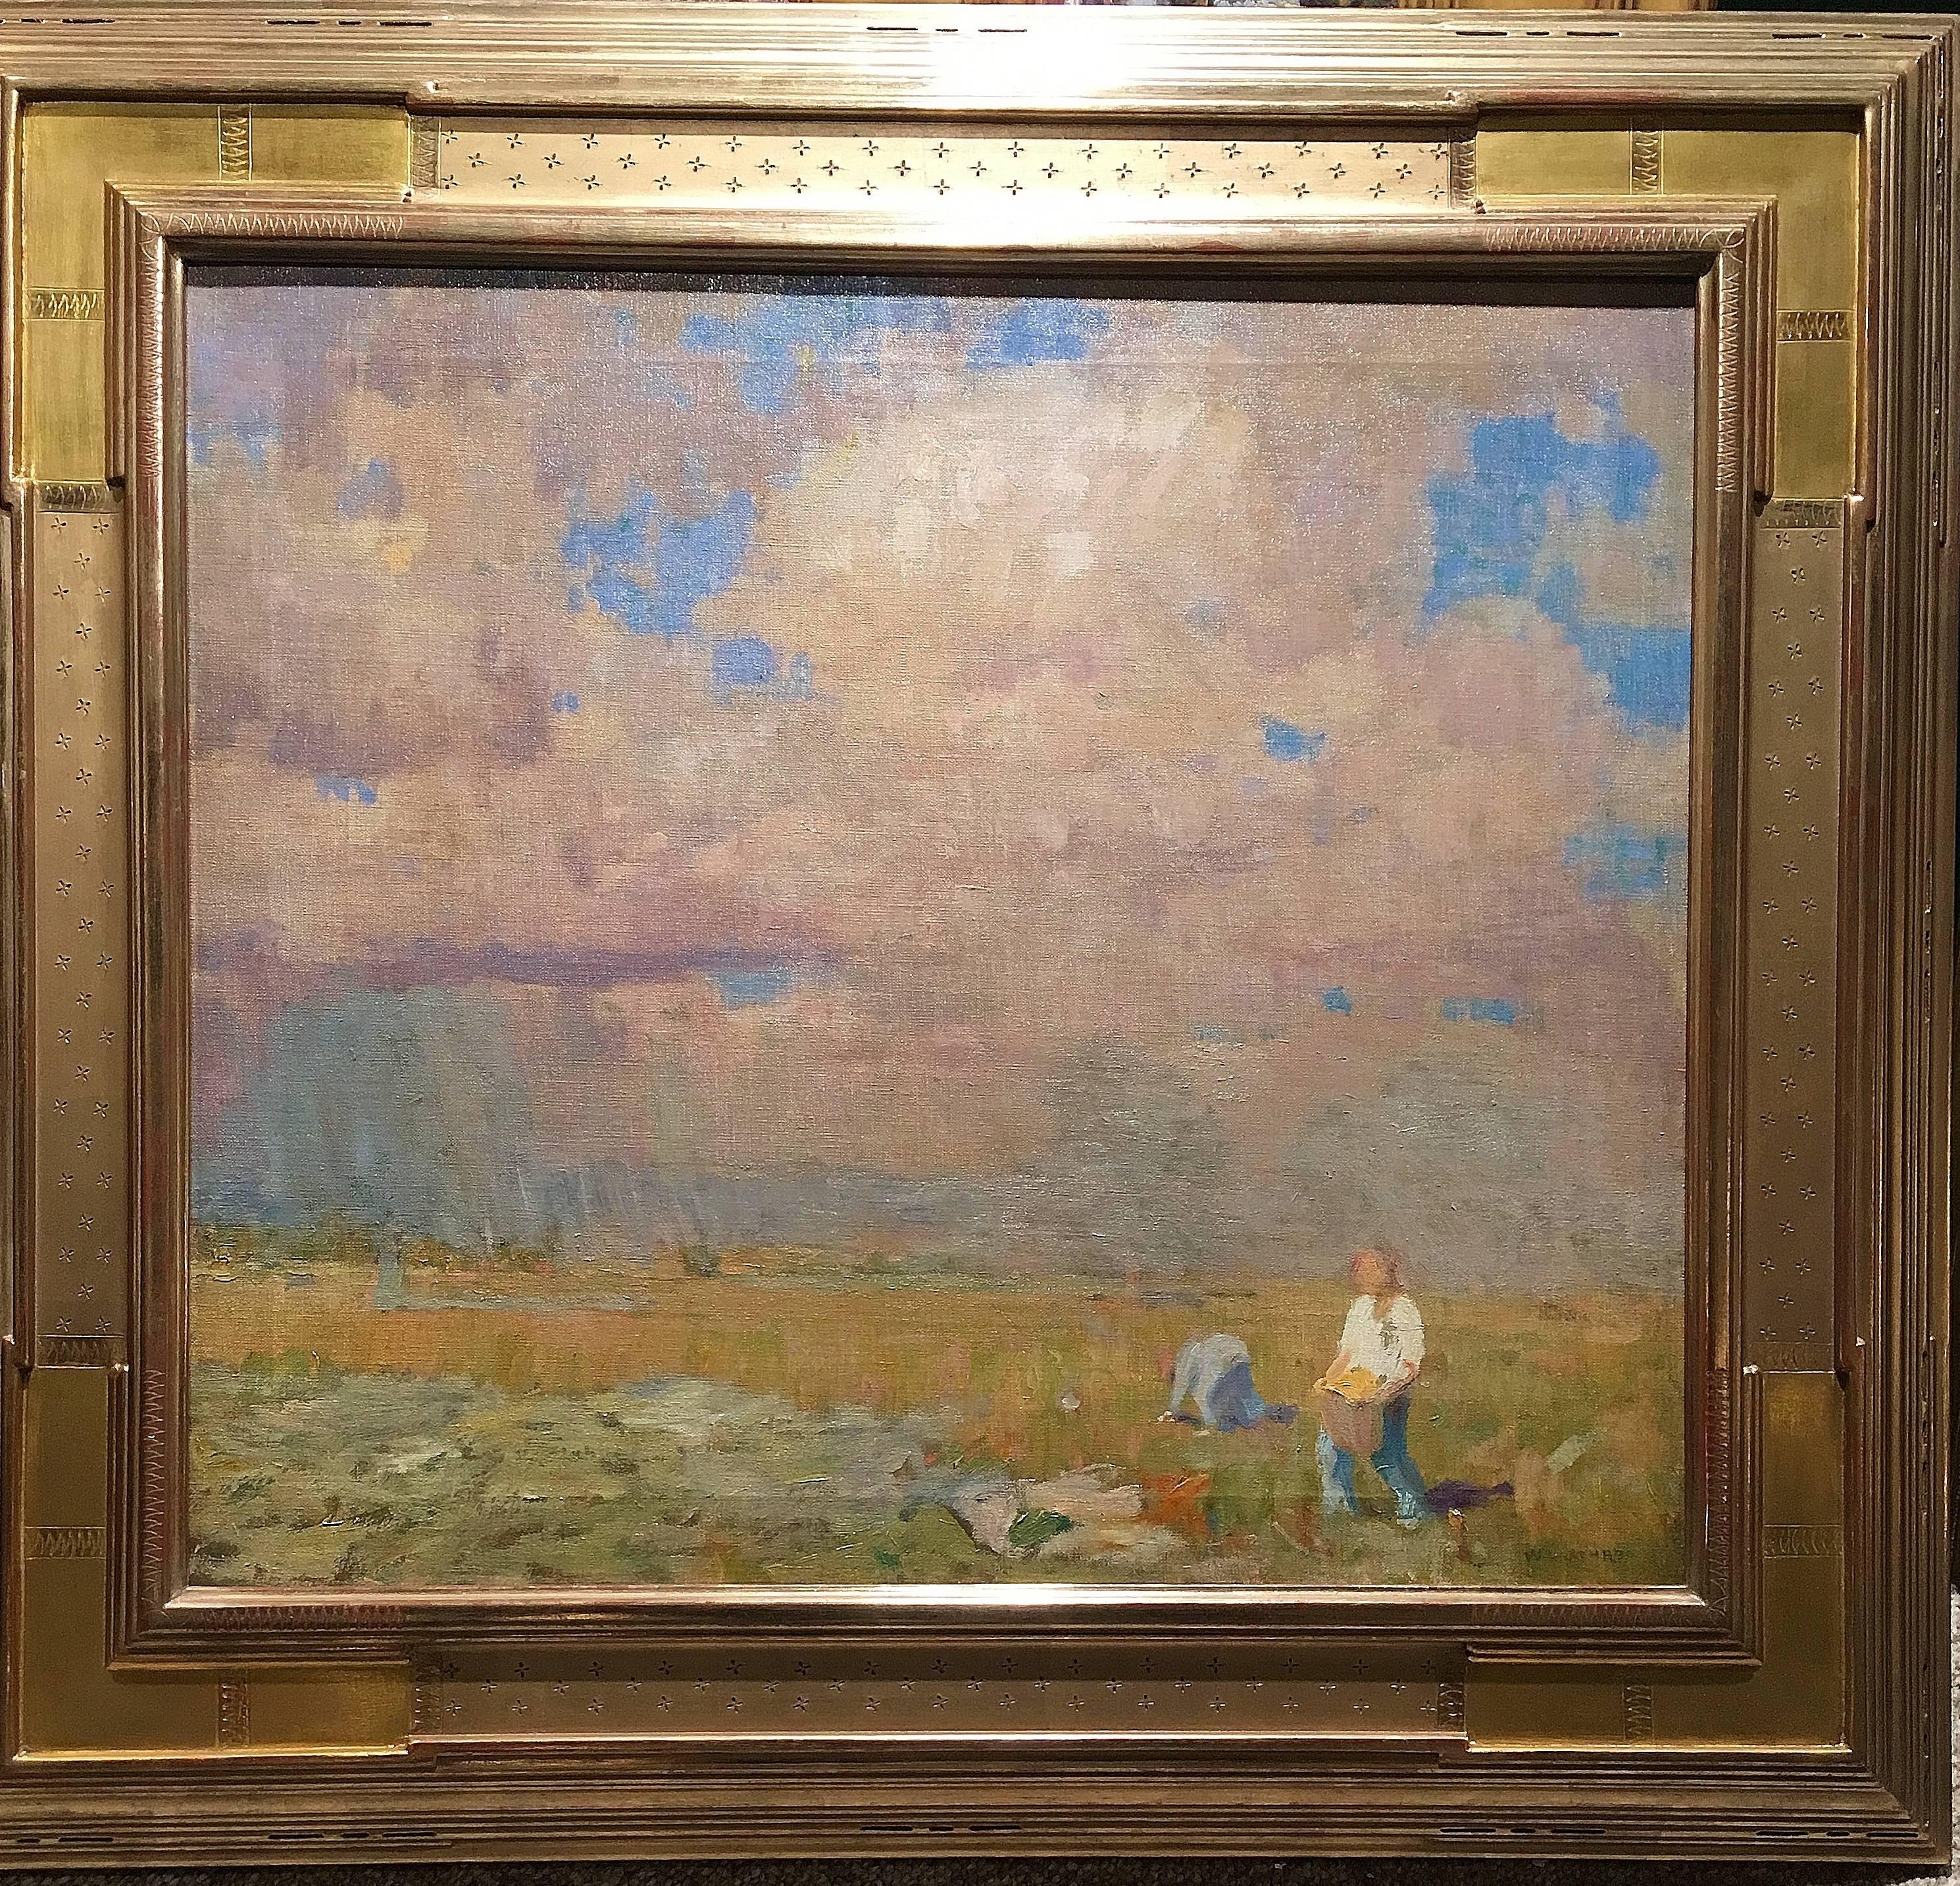 A Distant Shower - Painting by William Langson Lathrop